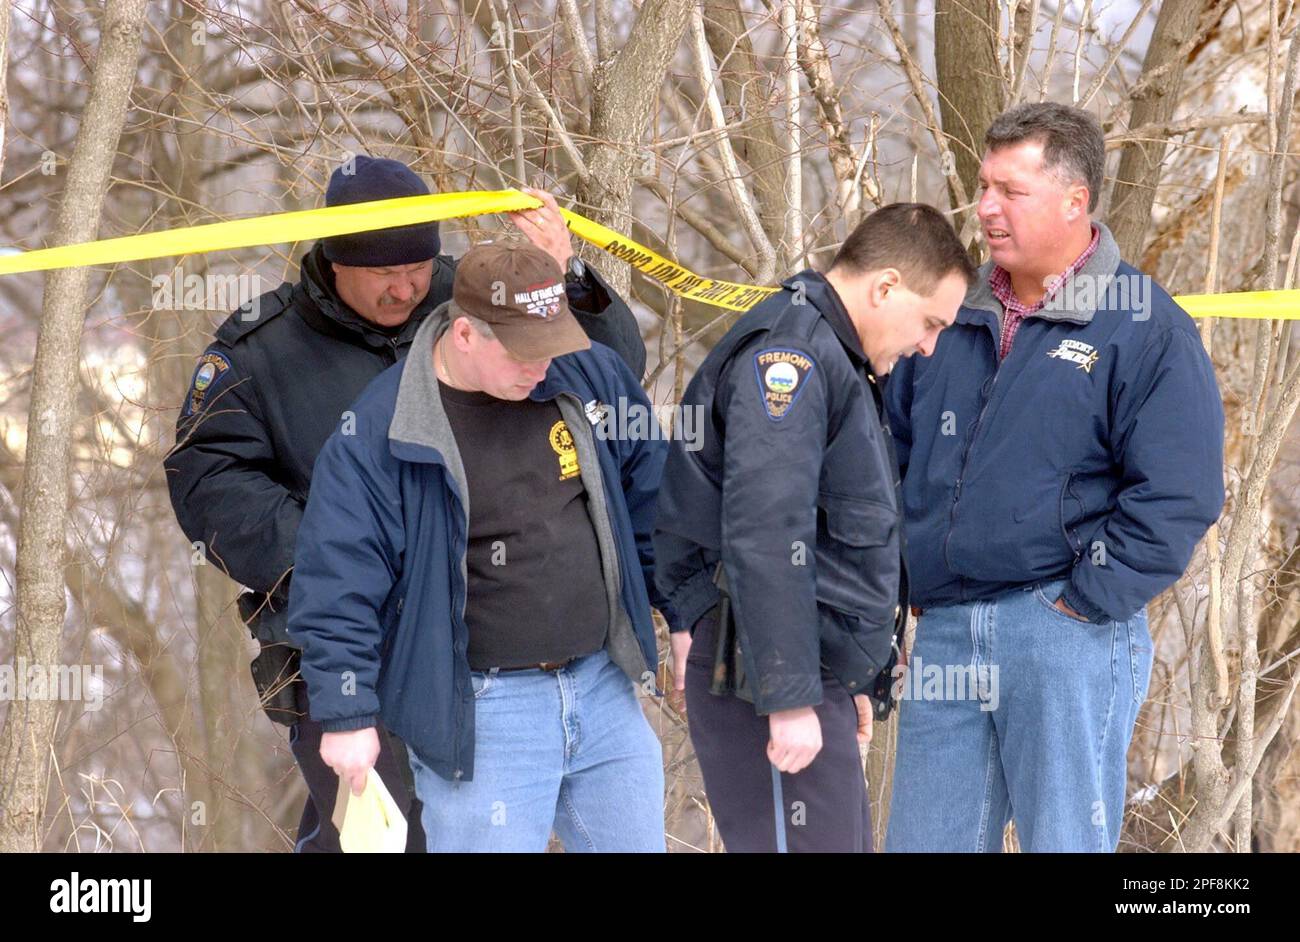 https://c8.alamy.com/comp/2PF8KK2/fremont-police-officials-from-left-brian-woods-tim-woolf-roger-oddo-and-jim-white-return-from-a-sandusky-river-enbankment-where-the-body-of-11-year-old-chanel-barnett-was-found-in-fremont-ohio-on-thursday-morning-march-6-2003-police-said-they-were-investigating-the-death-as-a-homicide-ap-photothe-news-messenger-ben-french-2PF8KK2.jpg